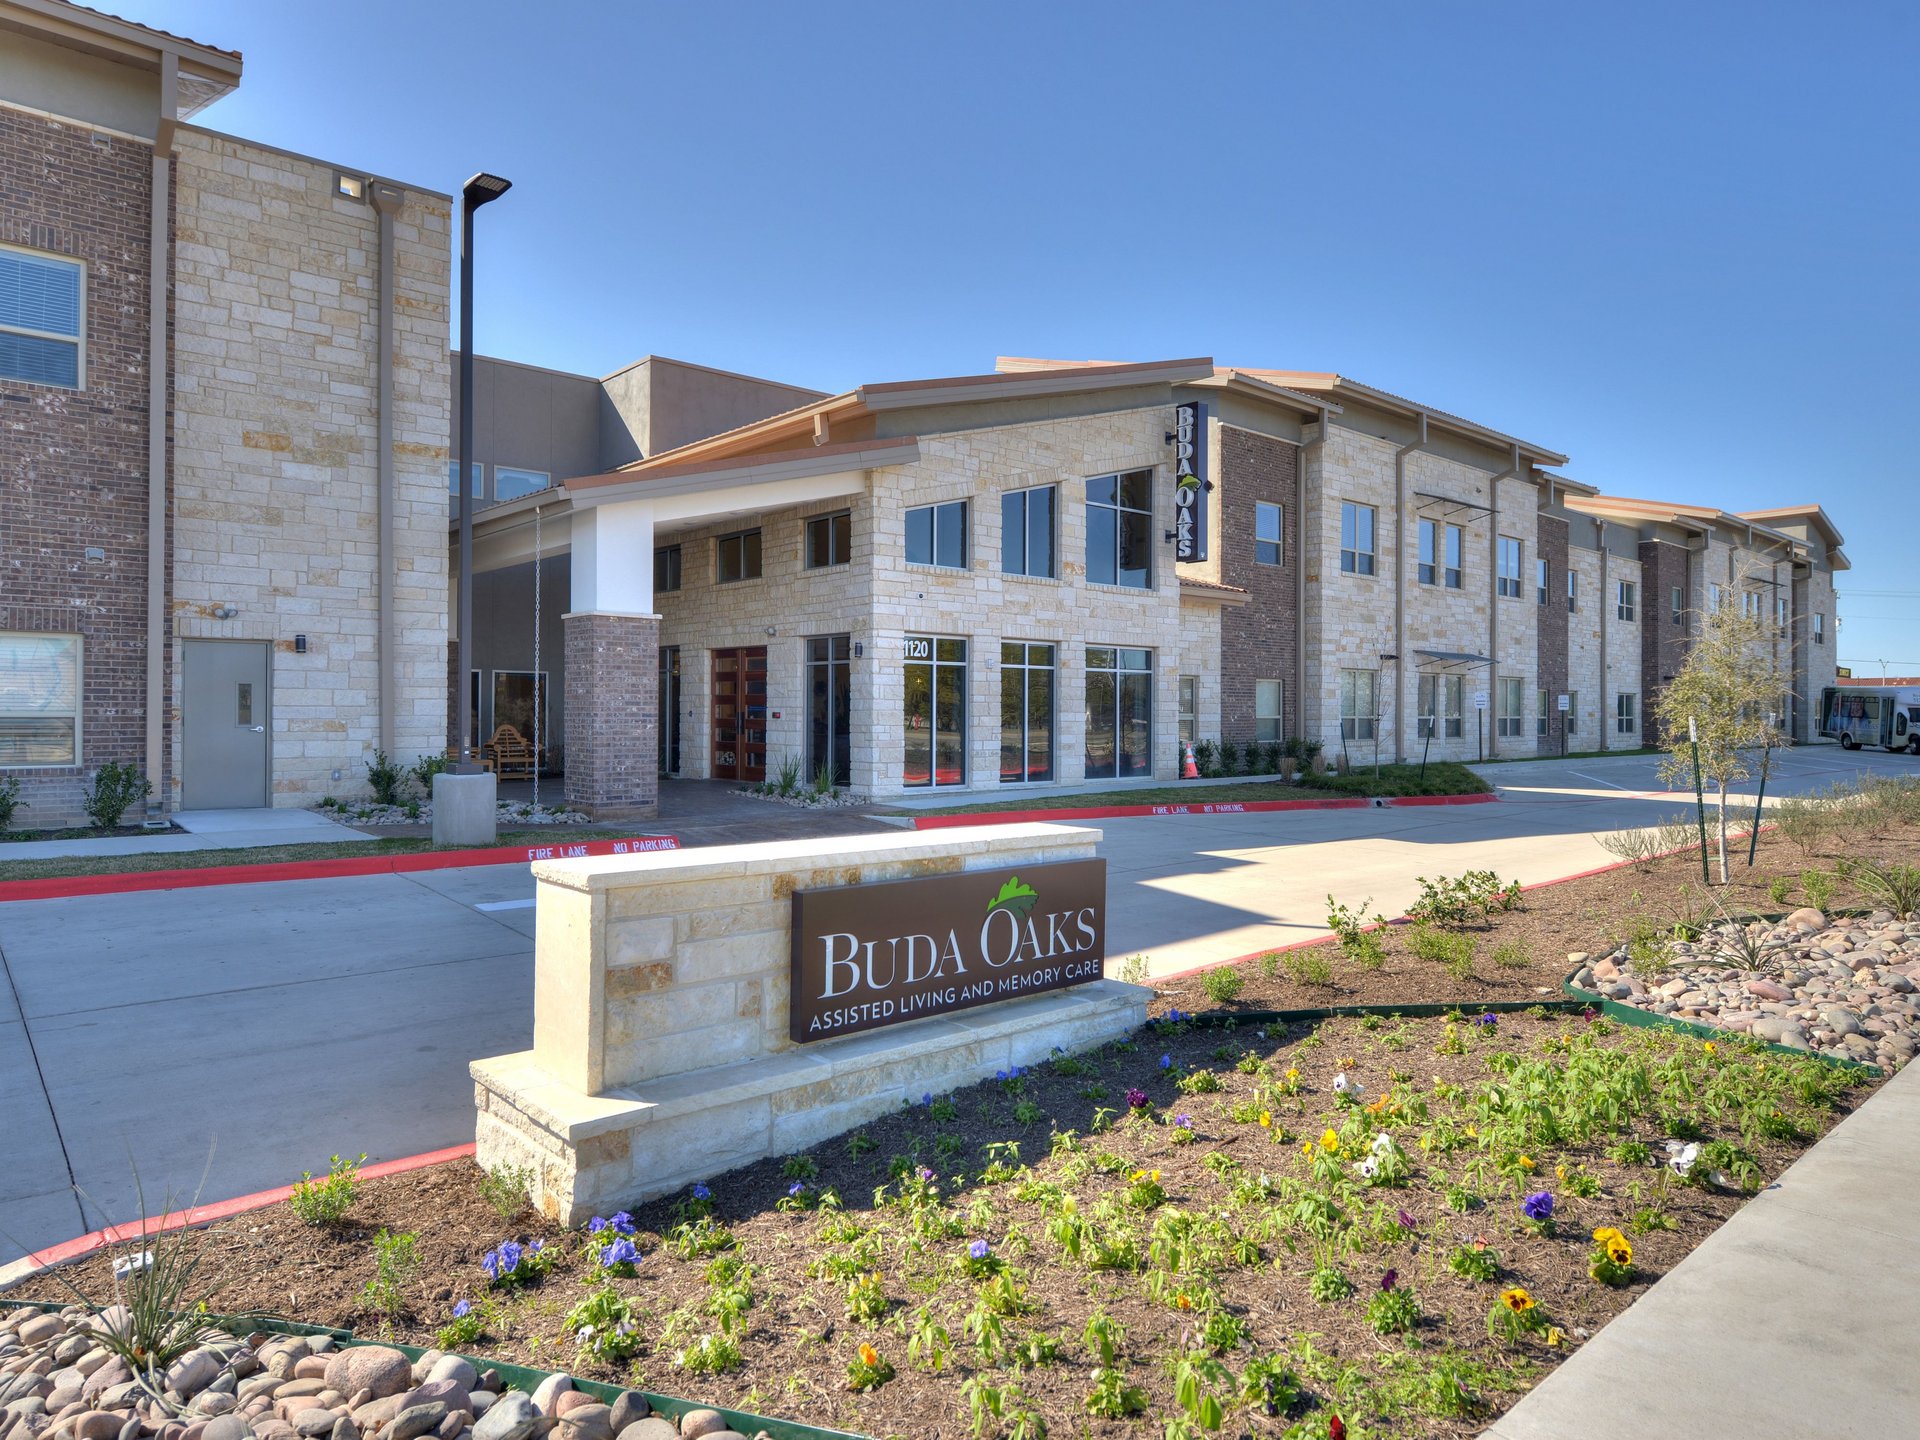 Buda Oaks Assisted Living and Memory Care image